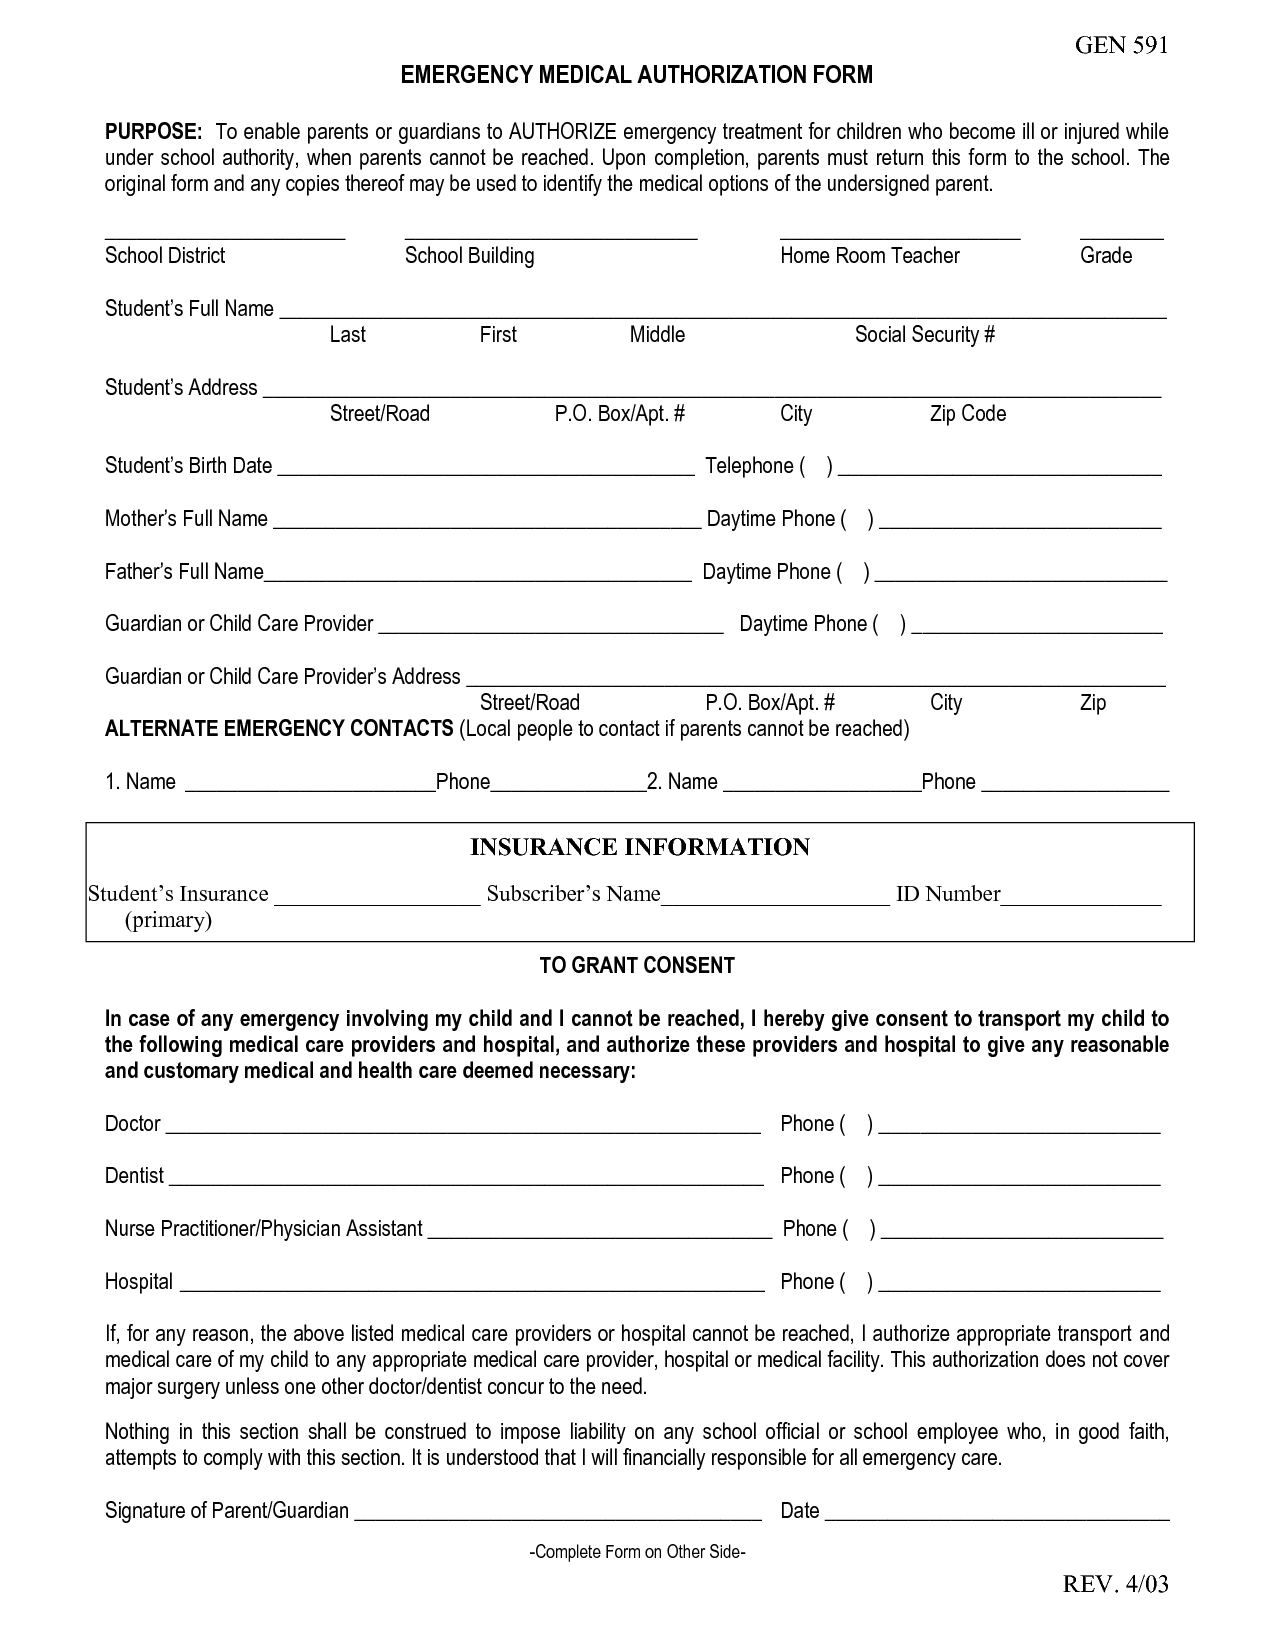 free-printable-emergency-medical-consent-form-printable-forms-free-online